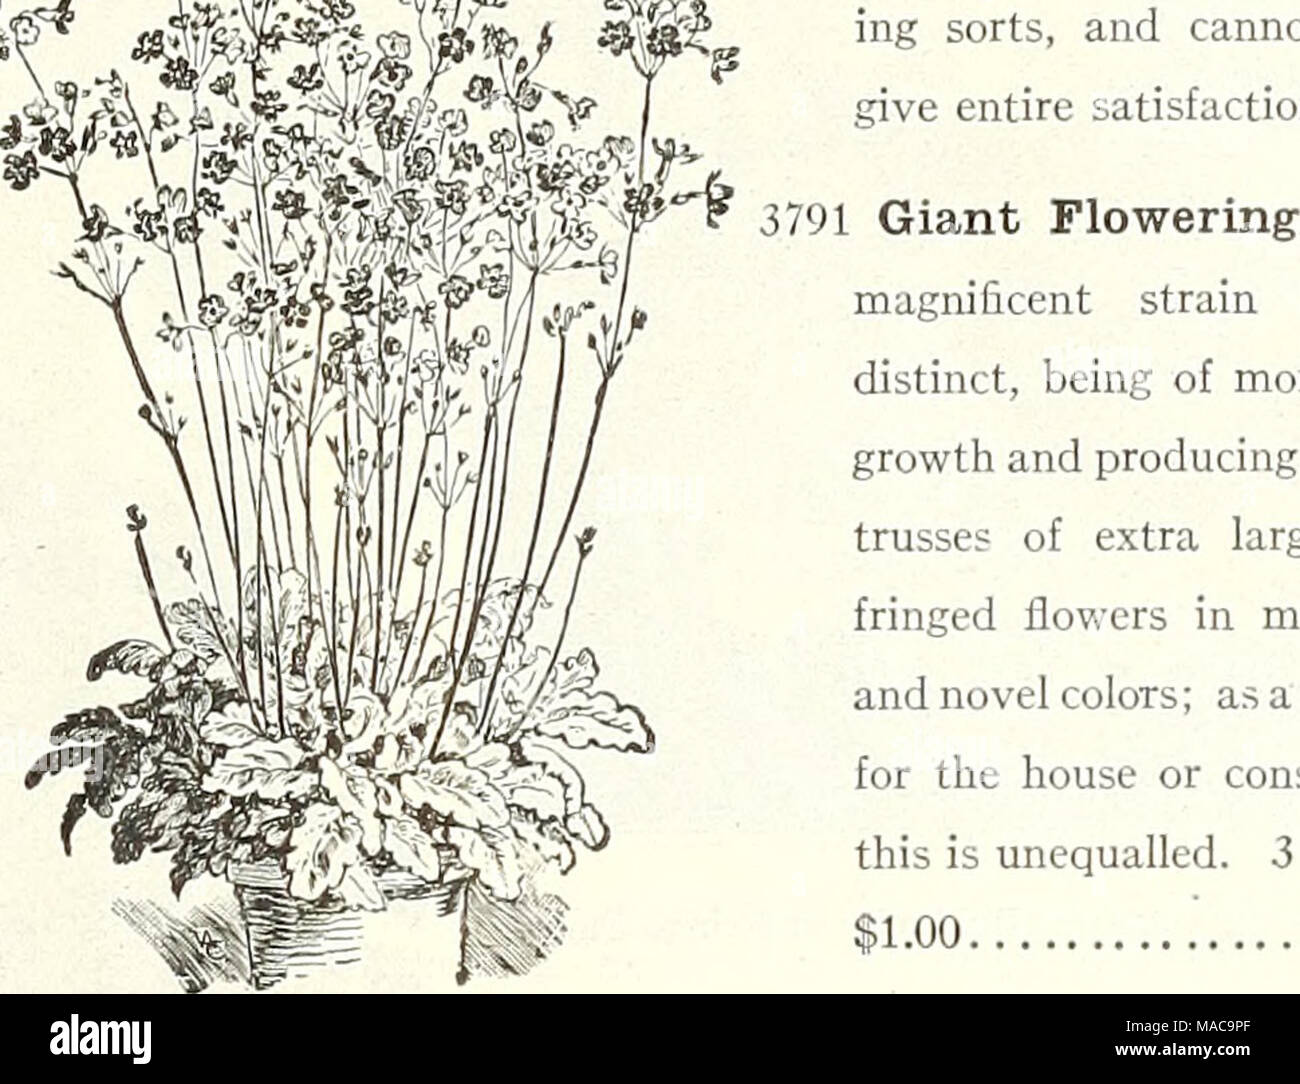 . Dreer's mid-summer list 1922 . 3800 Peerless Mixed. This mixture contains nothing but the finest-fringed large-flower- ing sorts, and cannot fail to give entire satisfaction 25 This magnificent strain is quite distinct, being of more robust growth and producing immense trusses of extra large, finely fringed flowers in many new and novel colors; as a pot plant for the house or conservatory this is unequalled. 3 pkts. for $1.00 35 Primula Malacoides (Improved Baby Primrose) 3815 Mixed. An colors 20 3816âGrandifloraalba. Pure white 20 3817 Kermesina. Bright crimson 20 3818 Rosea. Beautiful clea Stock Photo